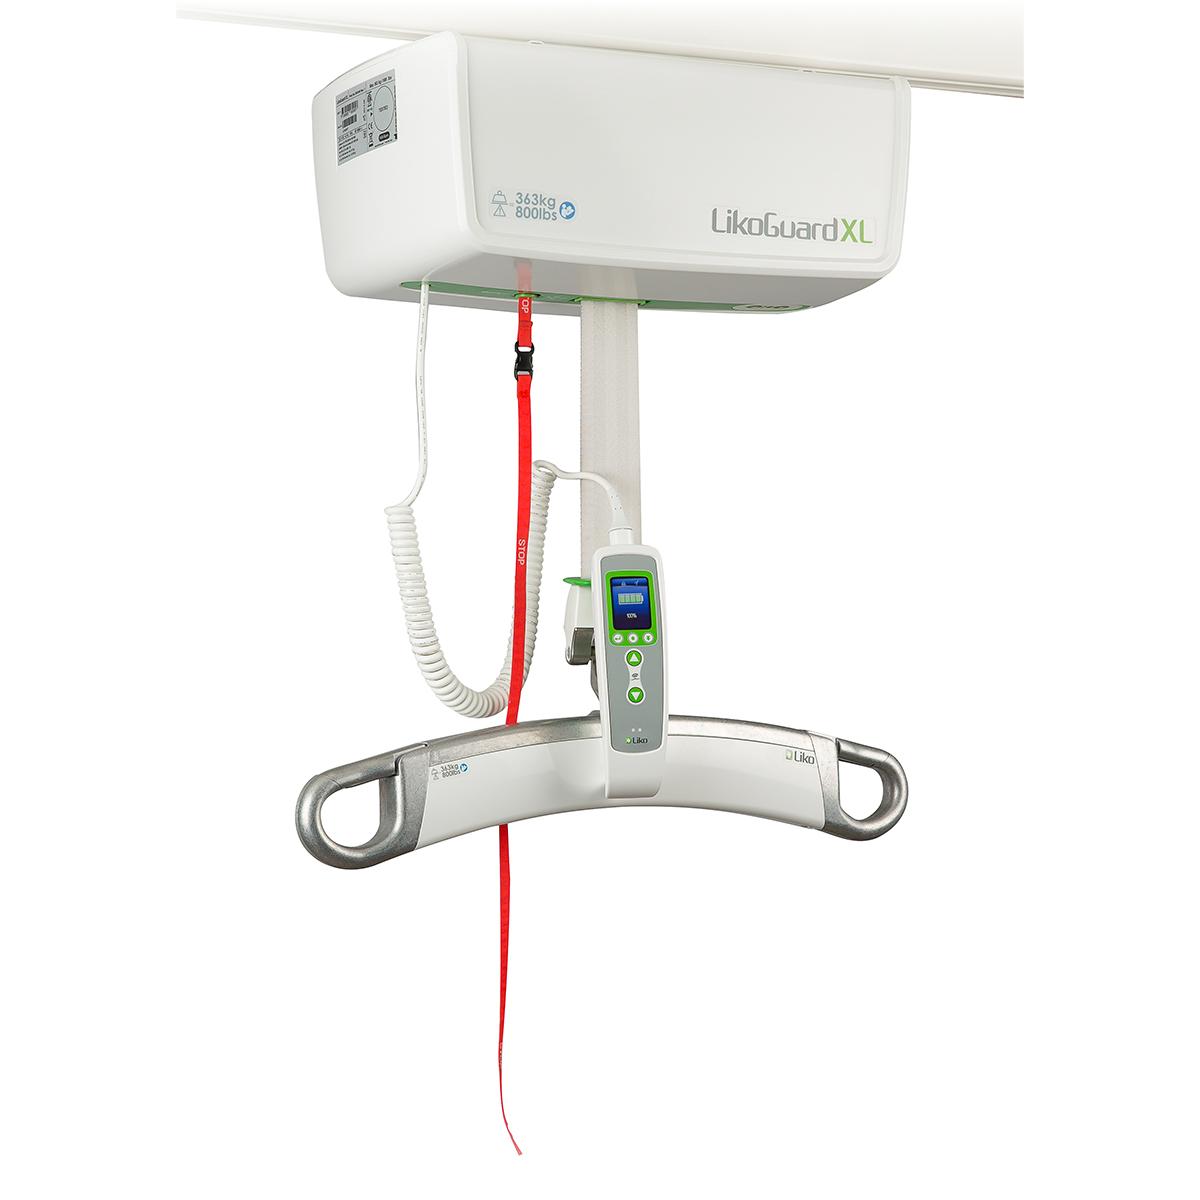 A posterior view of the rail-based LikoGuard XL overhead patient lift. A red emergency override button is at the unit's top left.